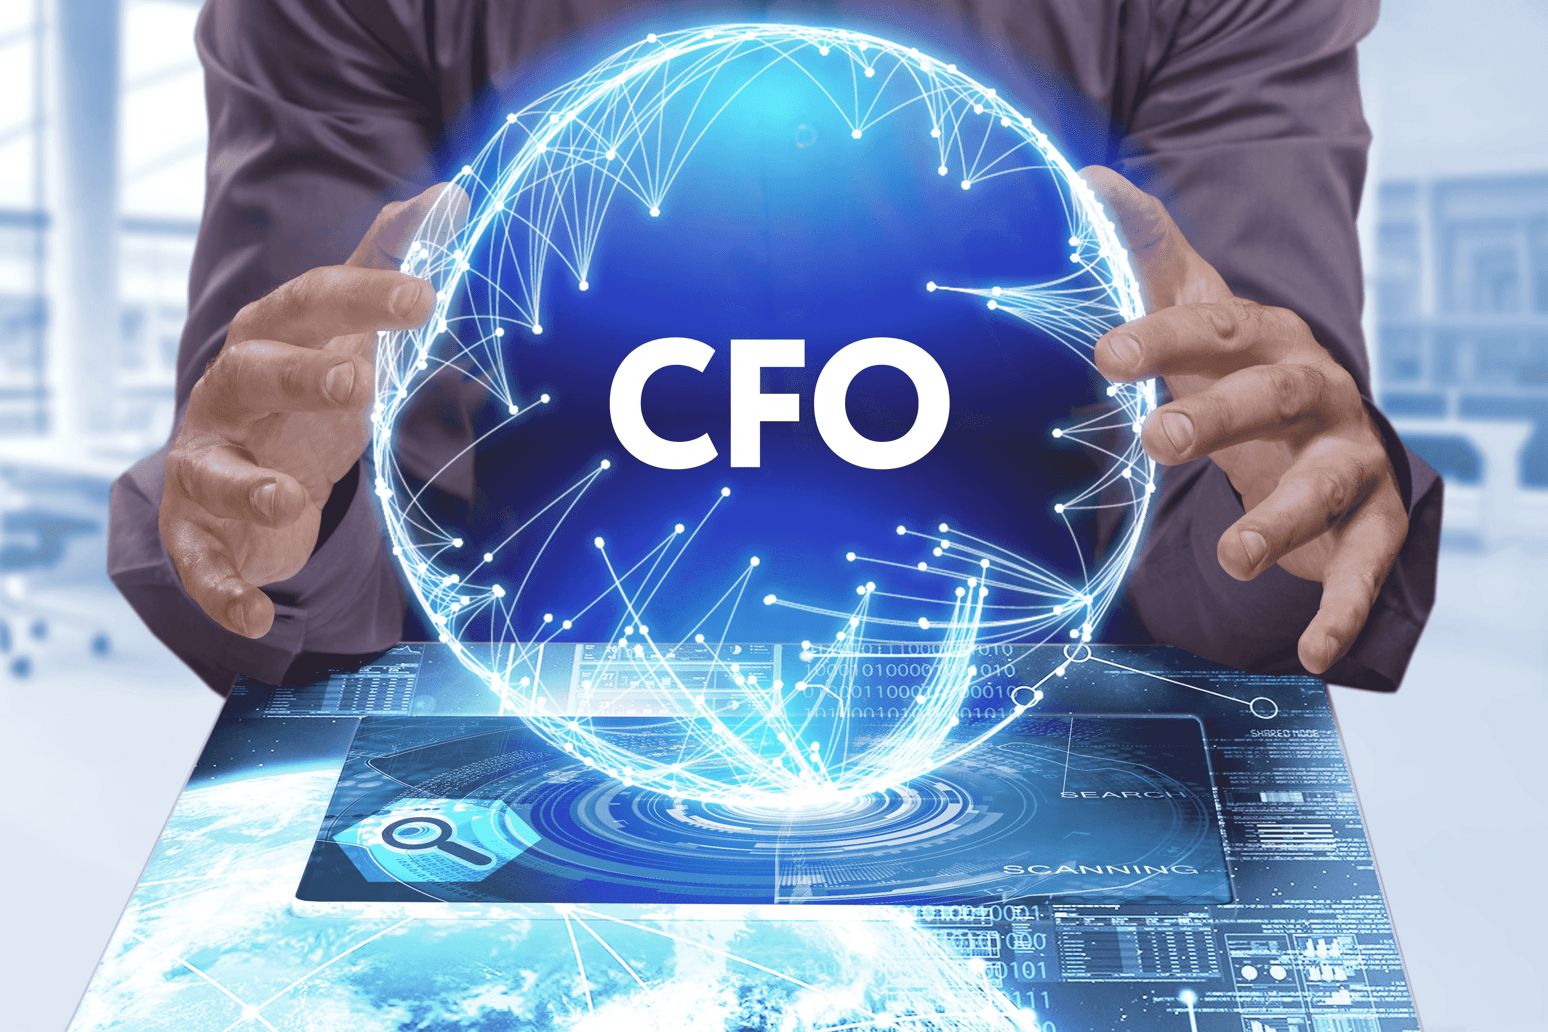 man holding holographic projection of the word CFO